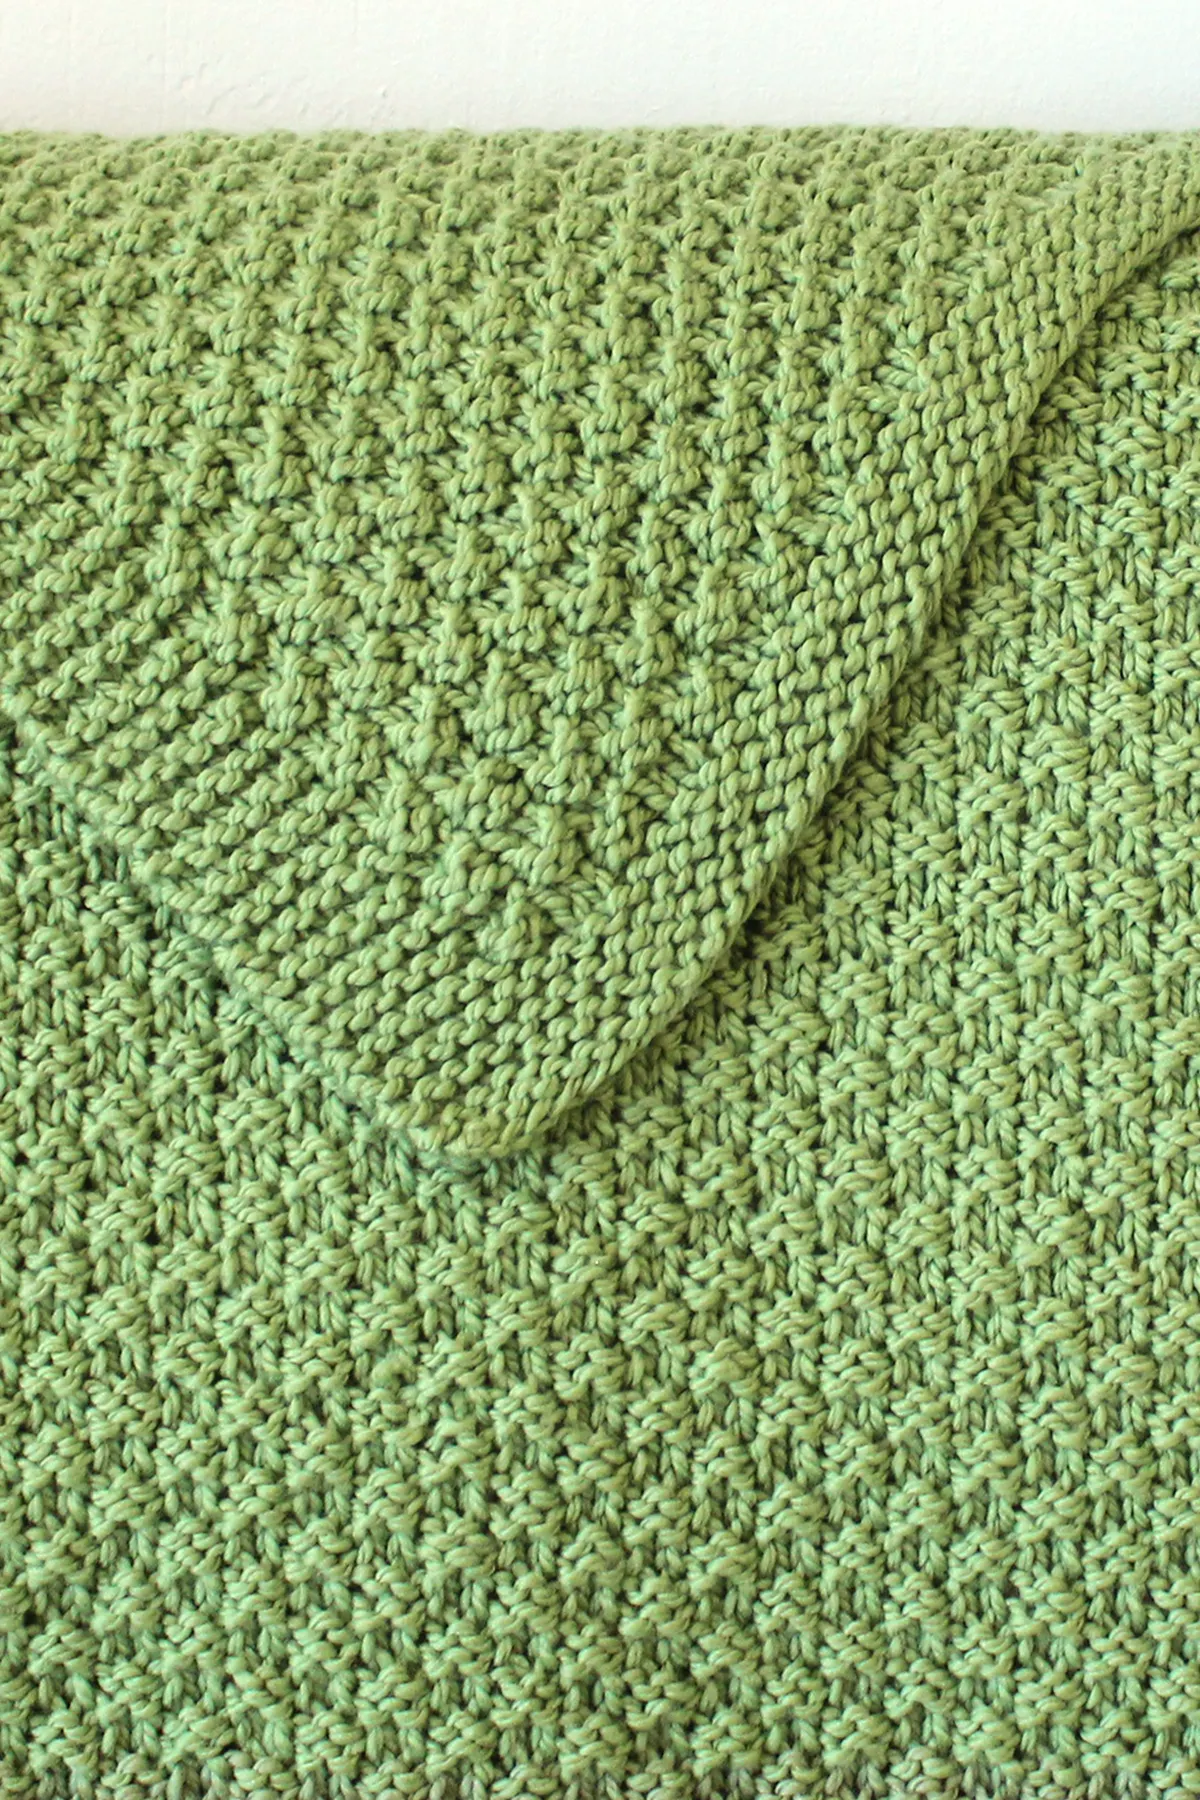 Reversible knitted blanket in double moss stitch pattern with green yarn color.